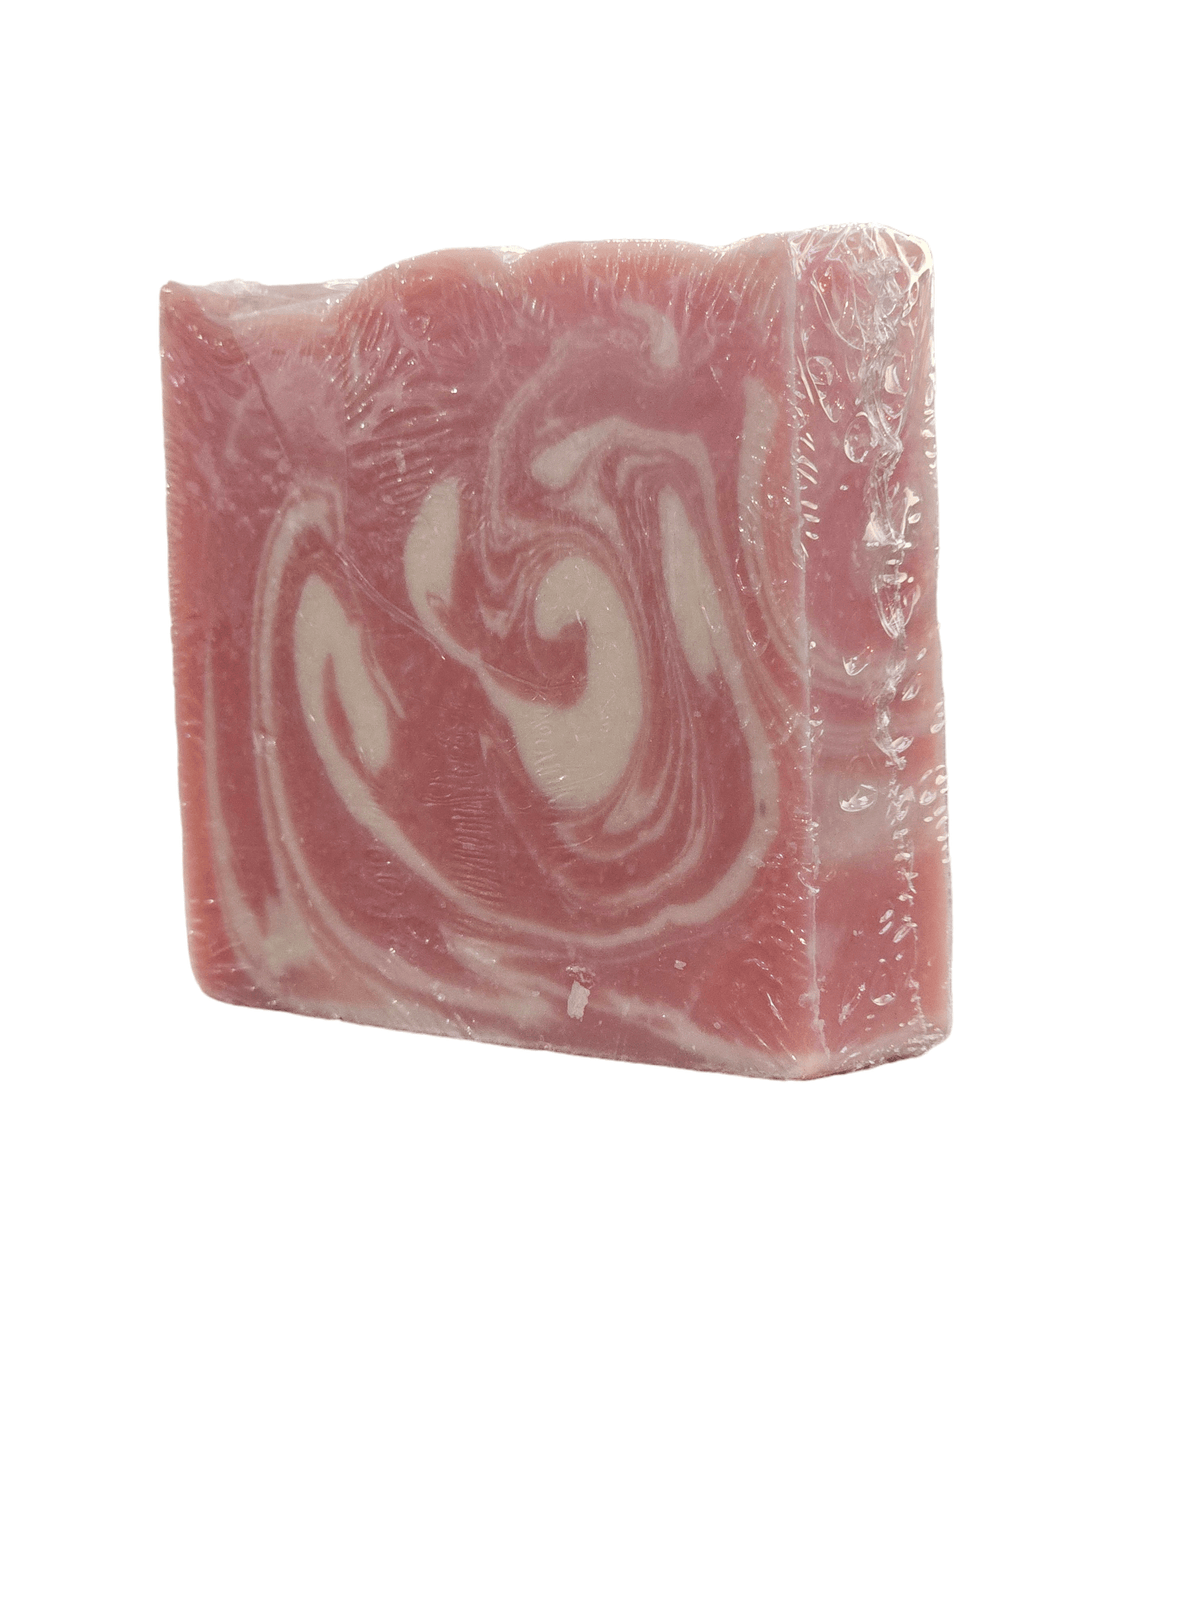 Enchanted Tropics Twilight Soap | Floral & Musky Coconut Aroma | Handcrafted by Spooklight Soap Co.